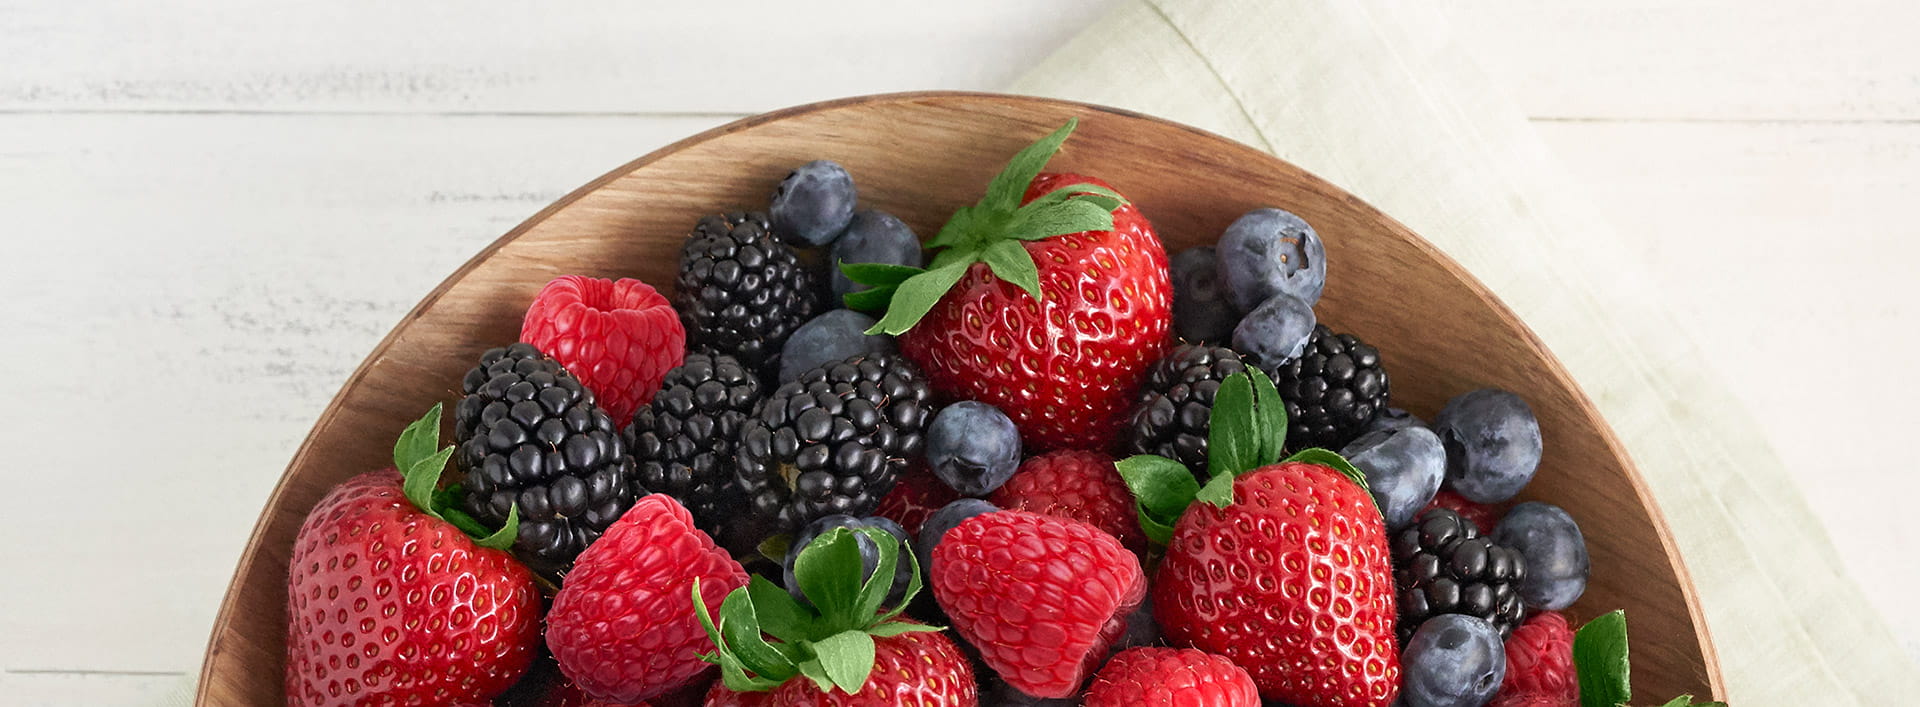 Berries FAQs | Driscoll's